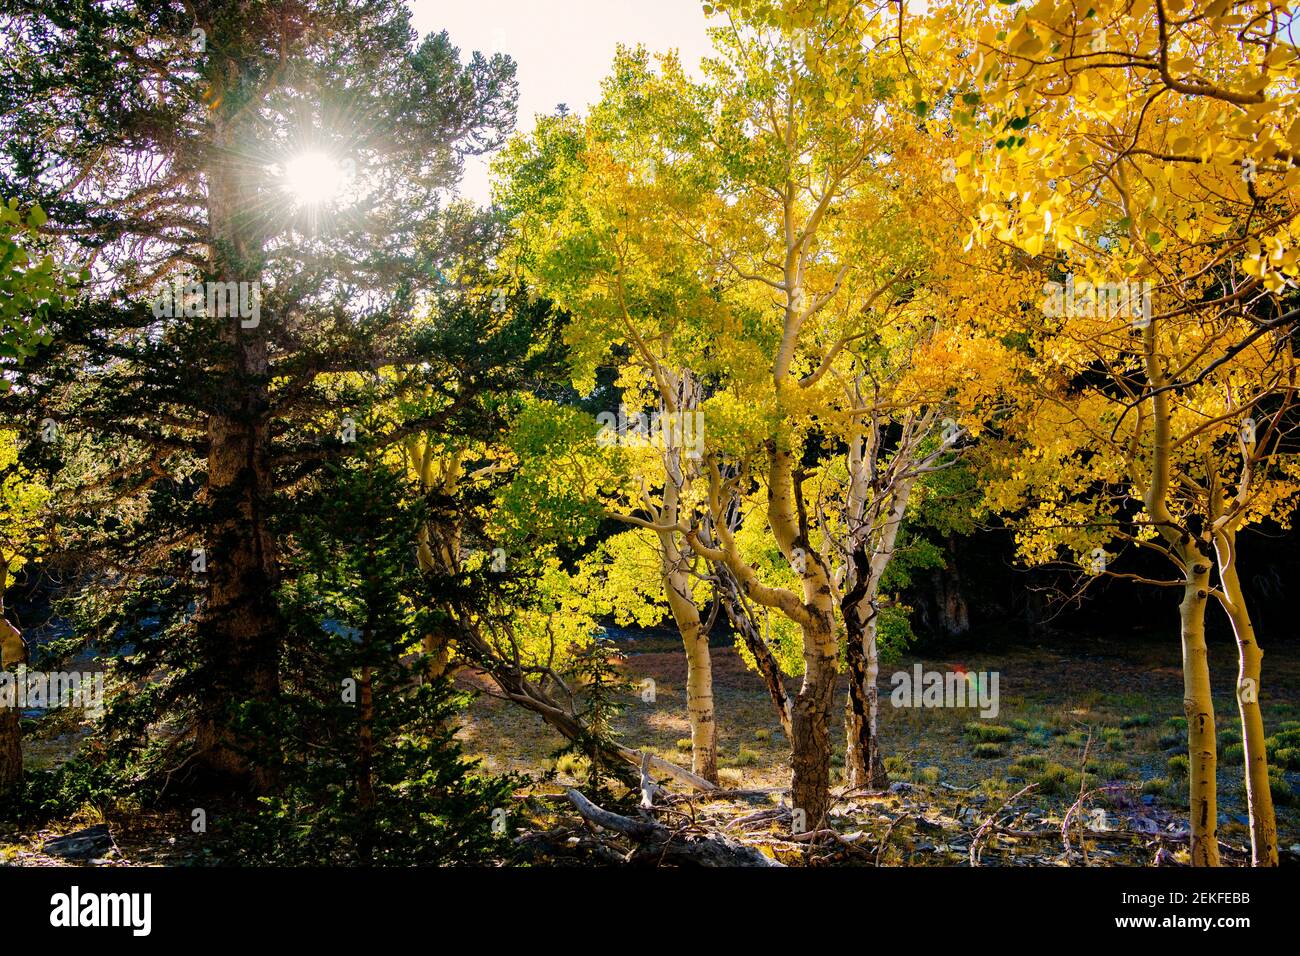 Autumn forest at sunset, Great Basin National Park, Nevada, USA Stock Photo